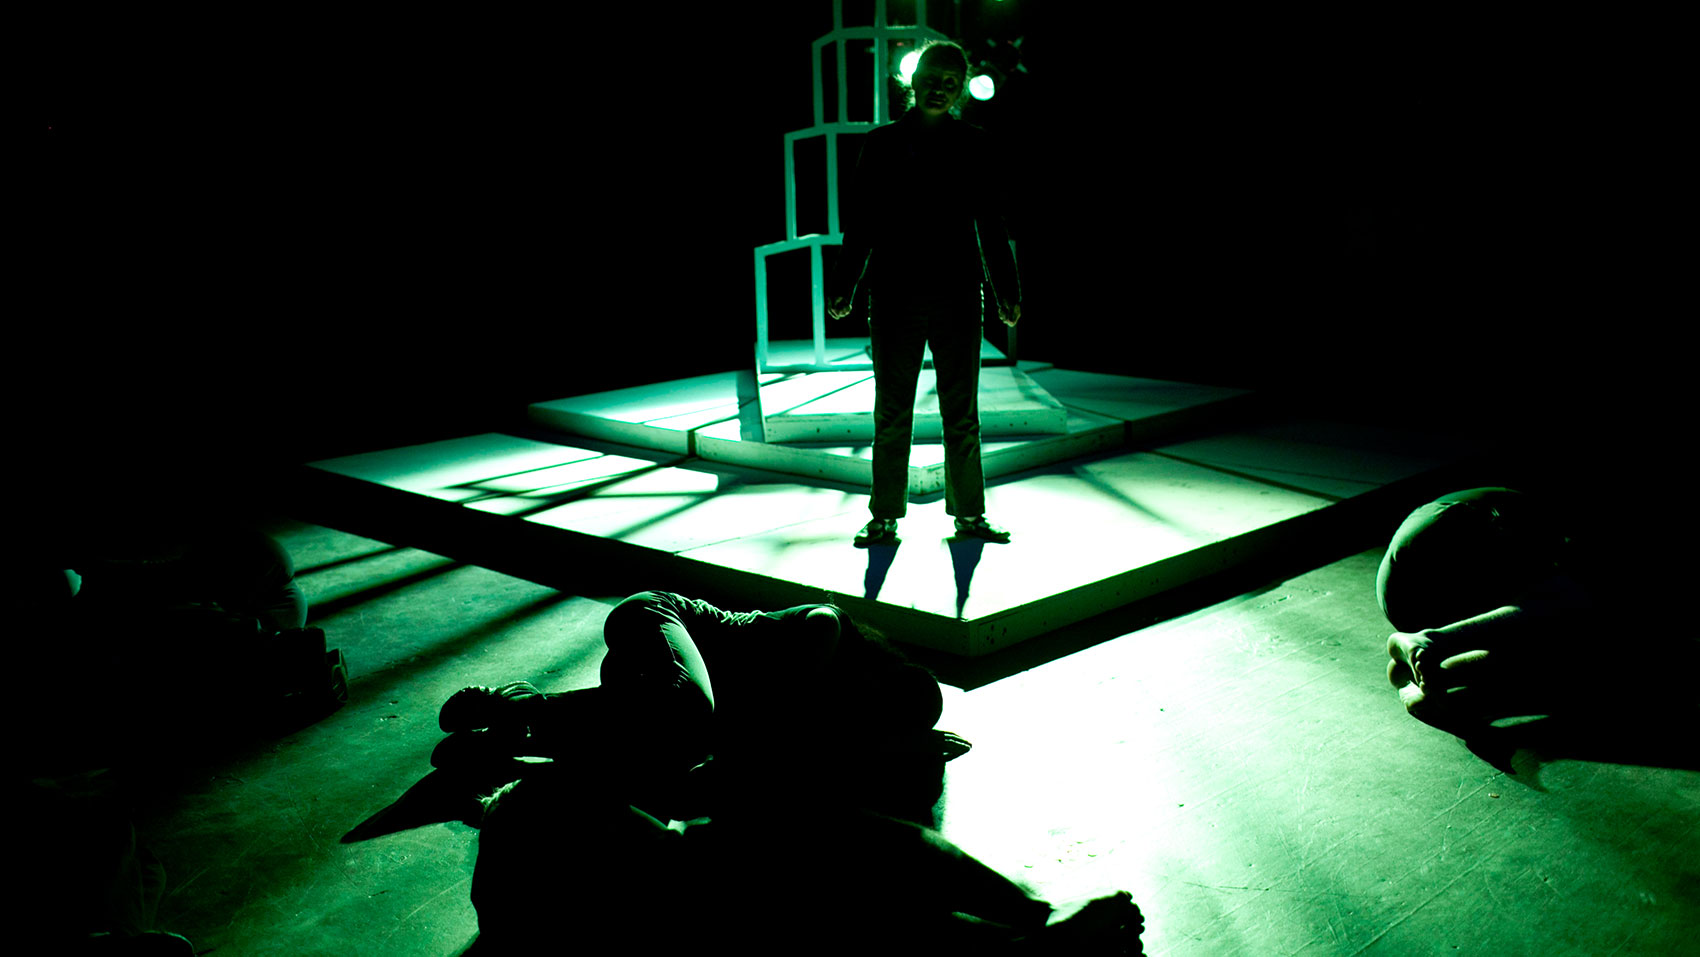 A character is silhouetted in green light in front of the tower structure, with other characters laying on the floor around her in fetal position.  